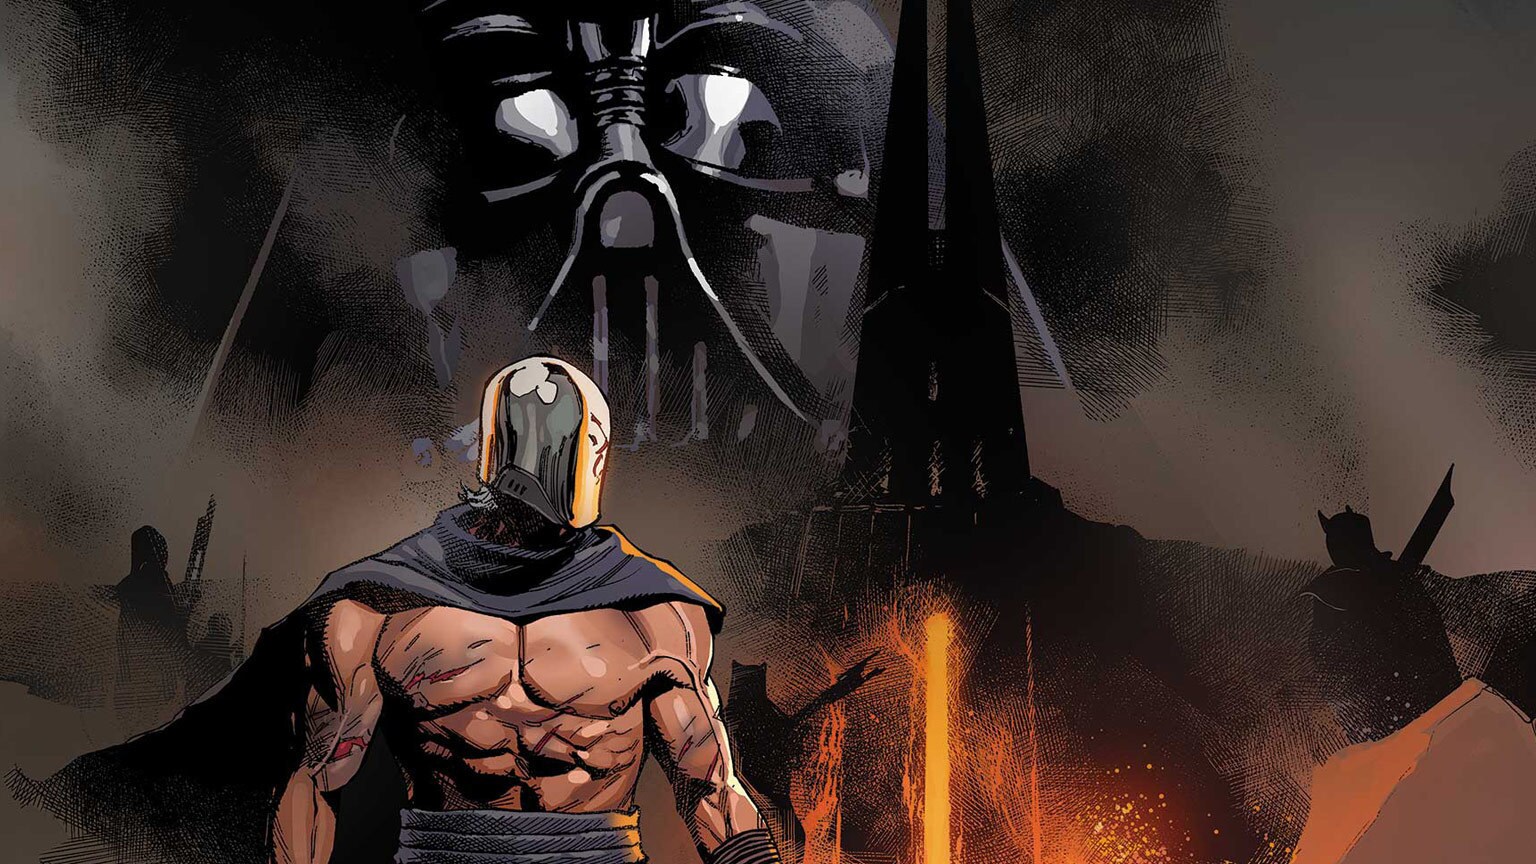 The Knights of Ren Strike in Crimson Reign, and More in Marvel’s April 2022 Star Wars Comics - Exclusive